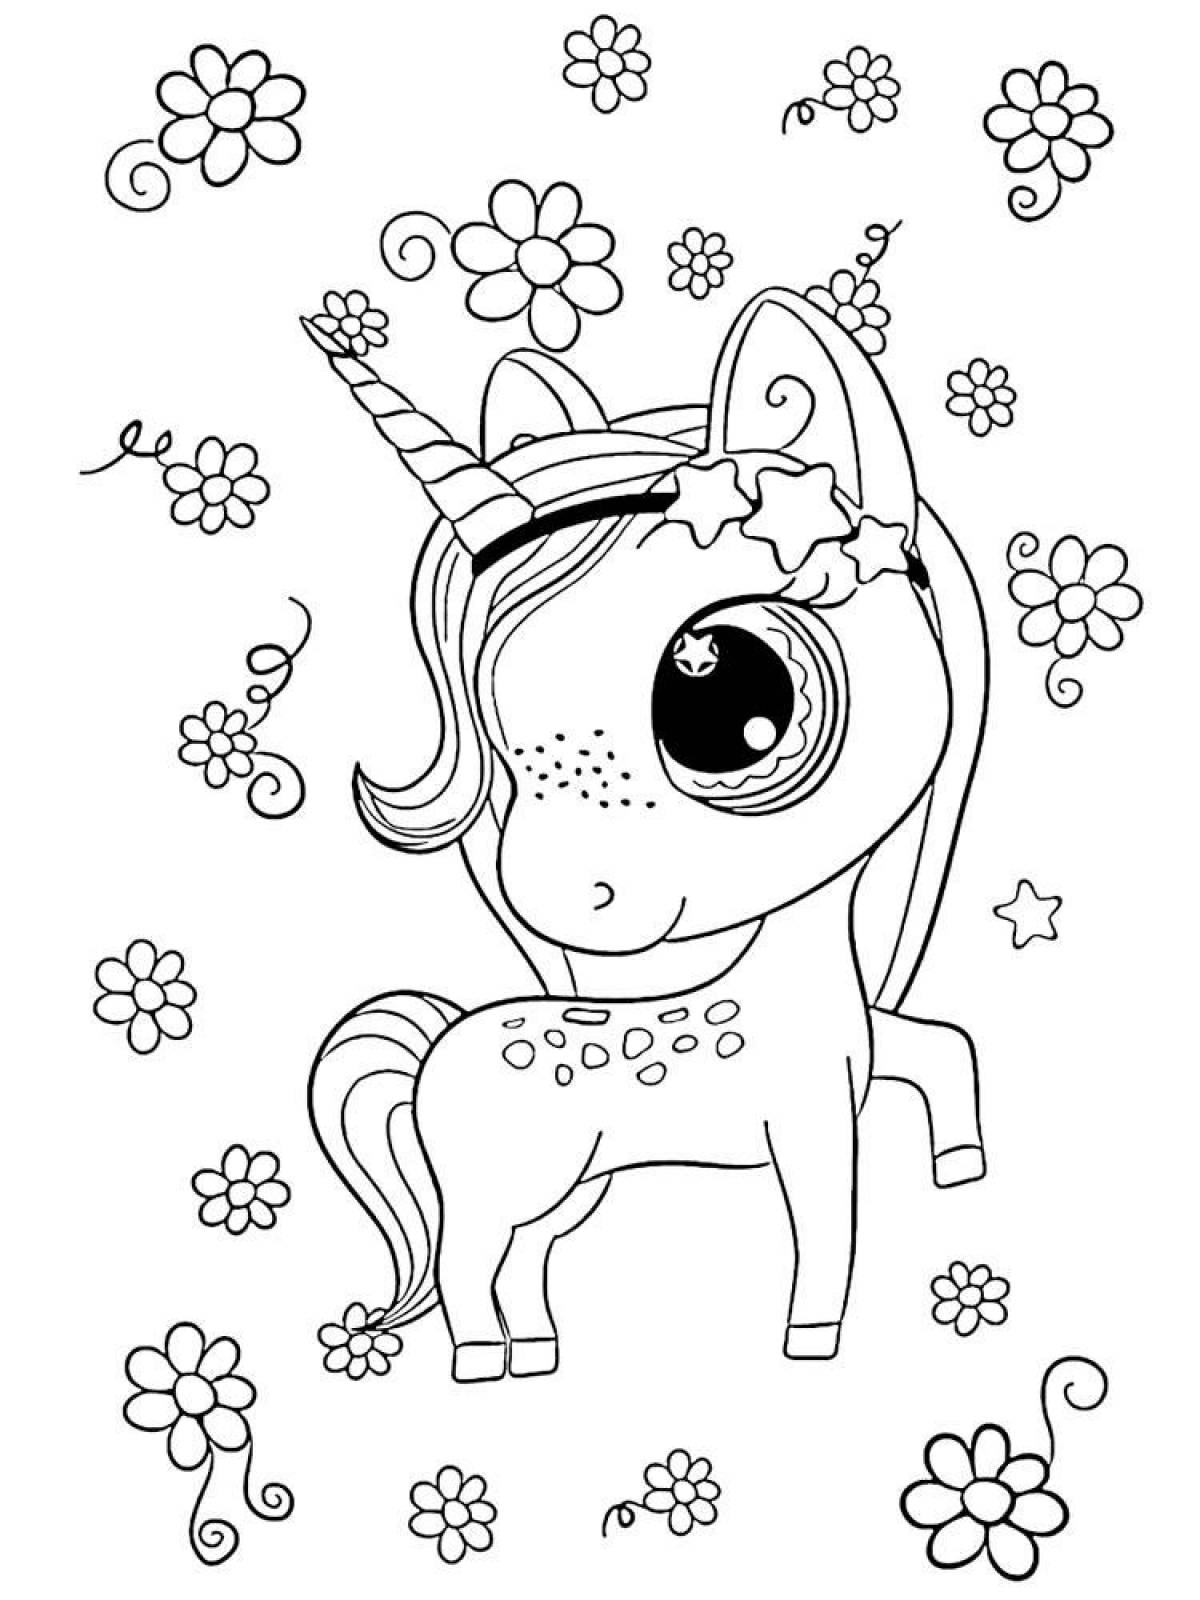 Dreamy unicorn coloring book for kids 4-5 years old